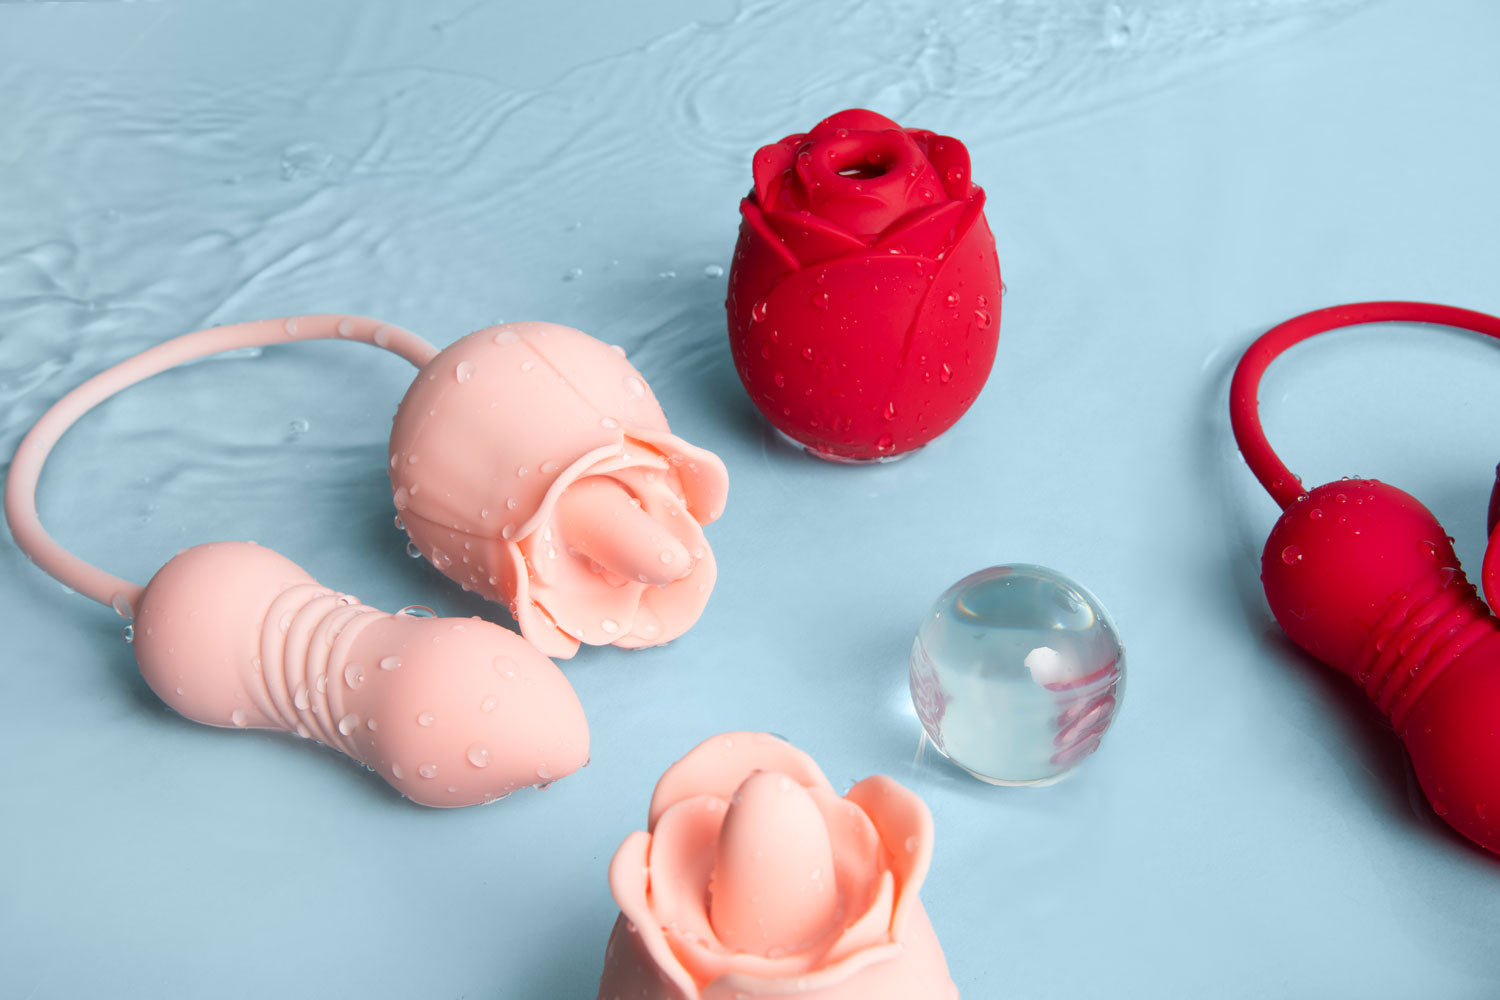 What is the rose toy? Everything you need to know